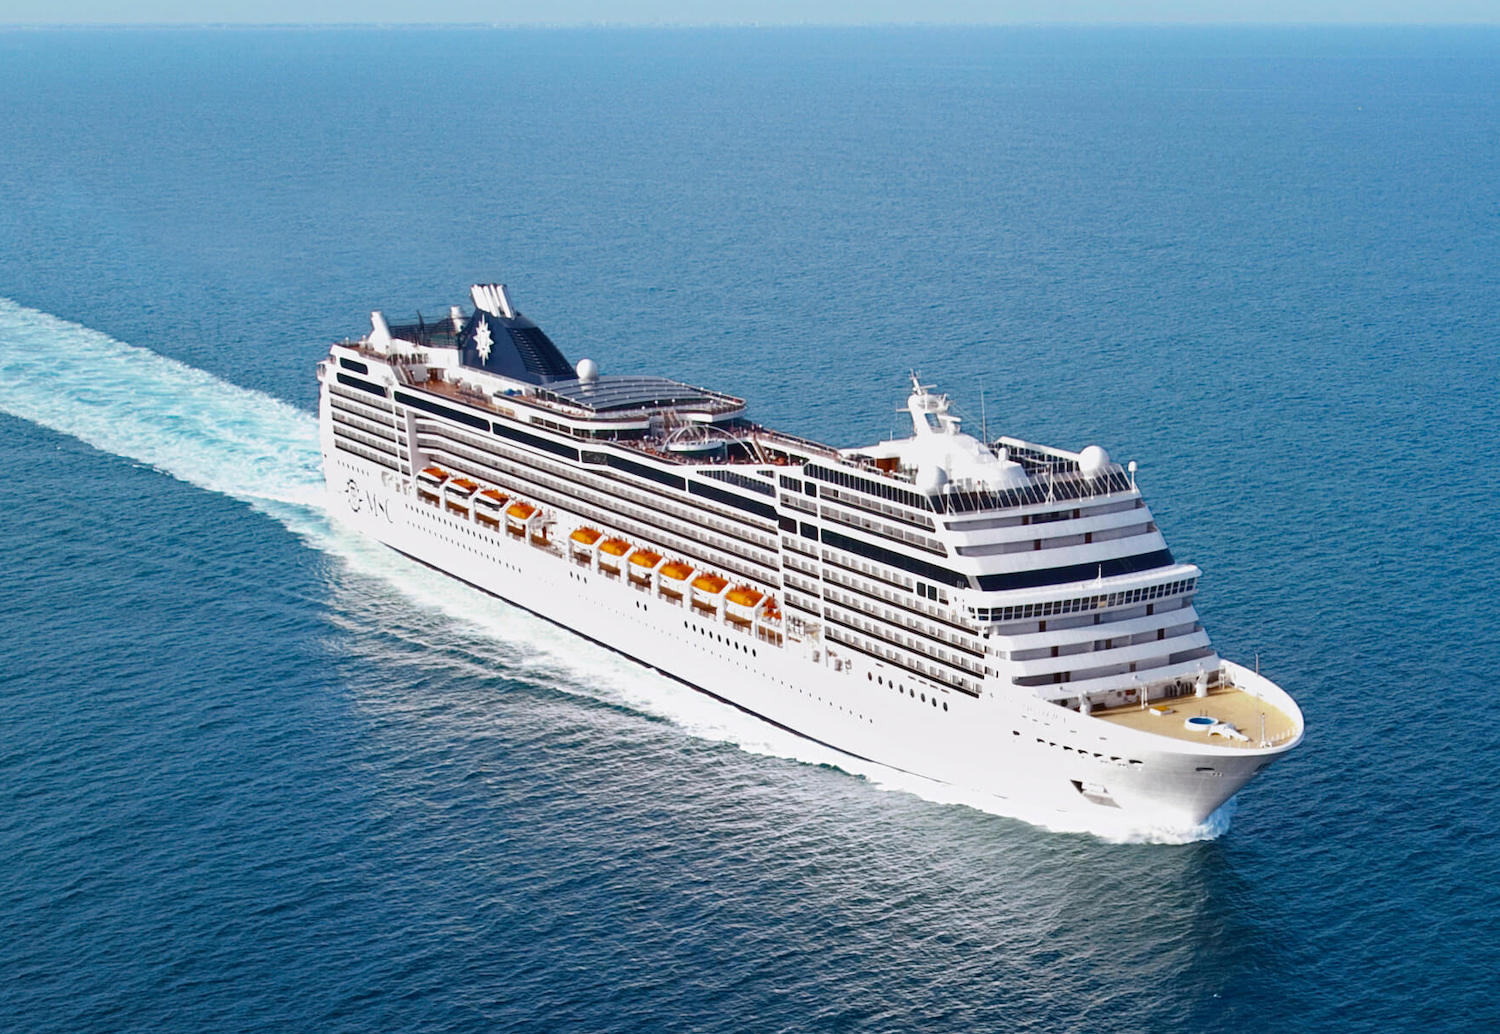 Instead of seven-night Eastern Mediterranean cruises from Bari, MSC Magnifica will operate 10-night cruises to ports in the Western and Eastern Med